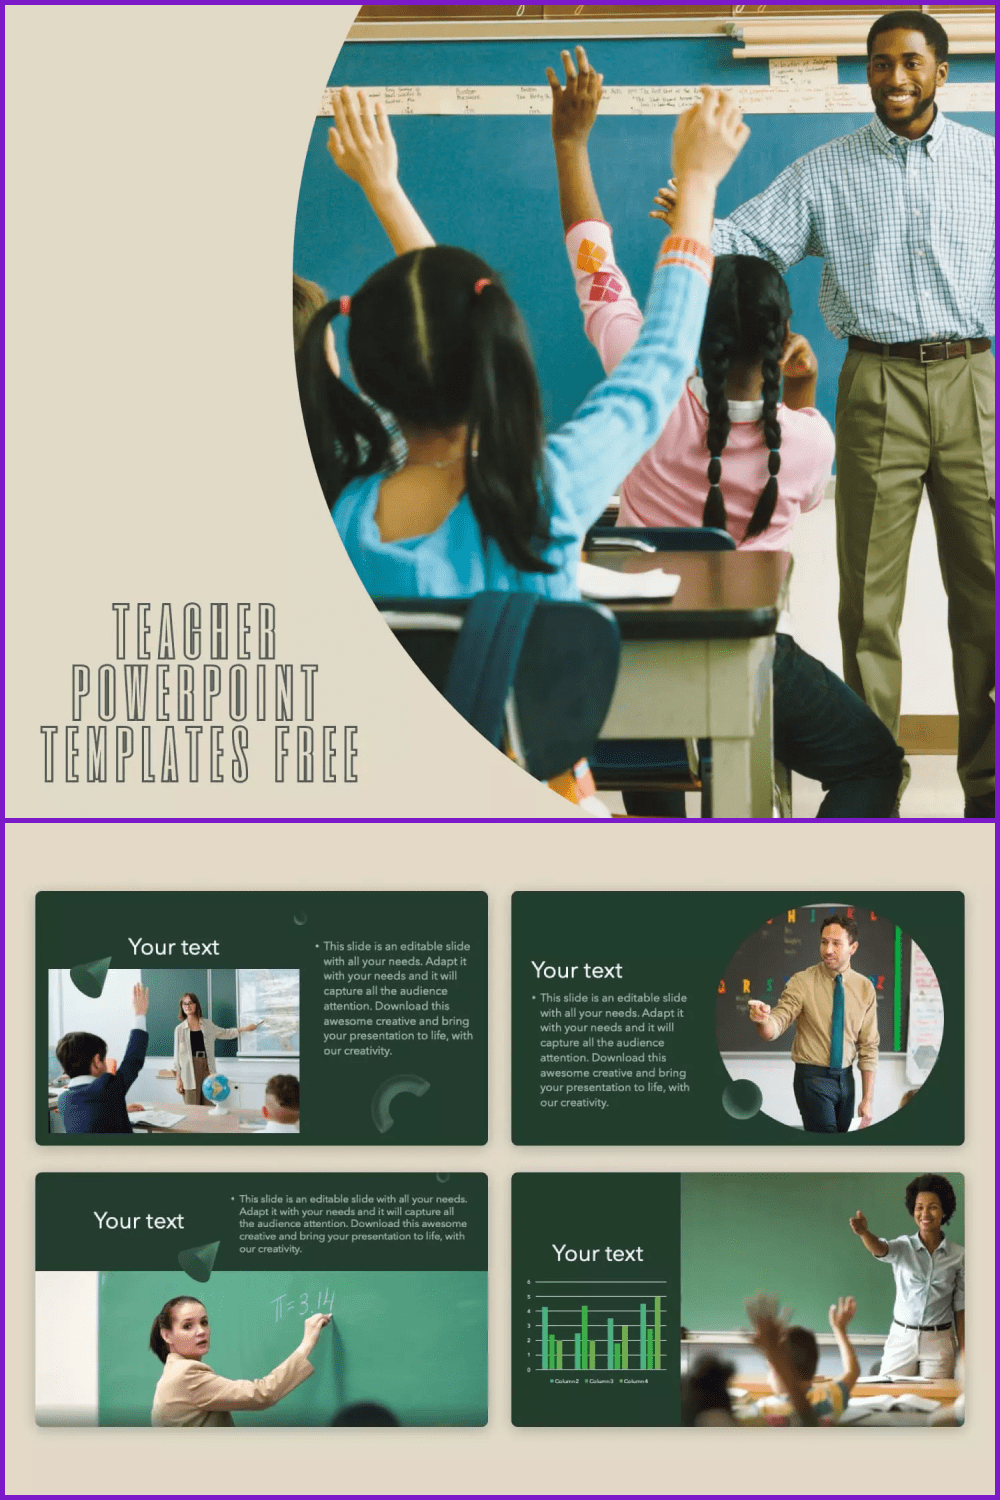 Collage of presentation pages with green backgrounds and close-ups of teachers in classrooms.